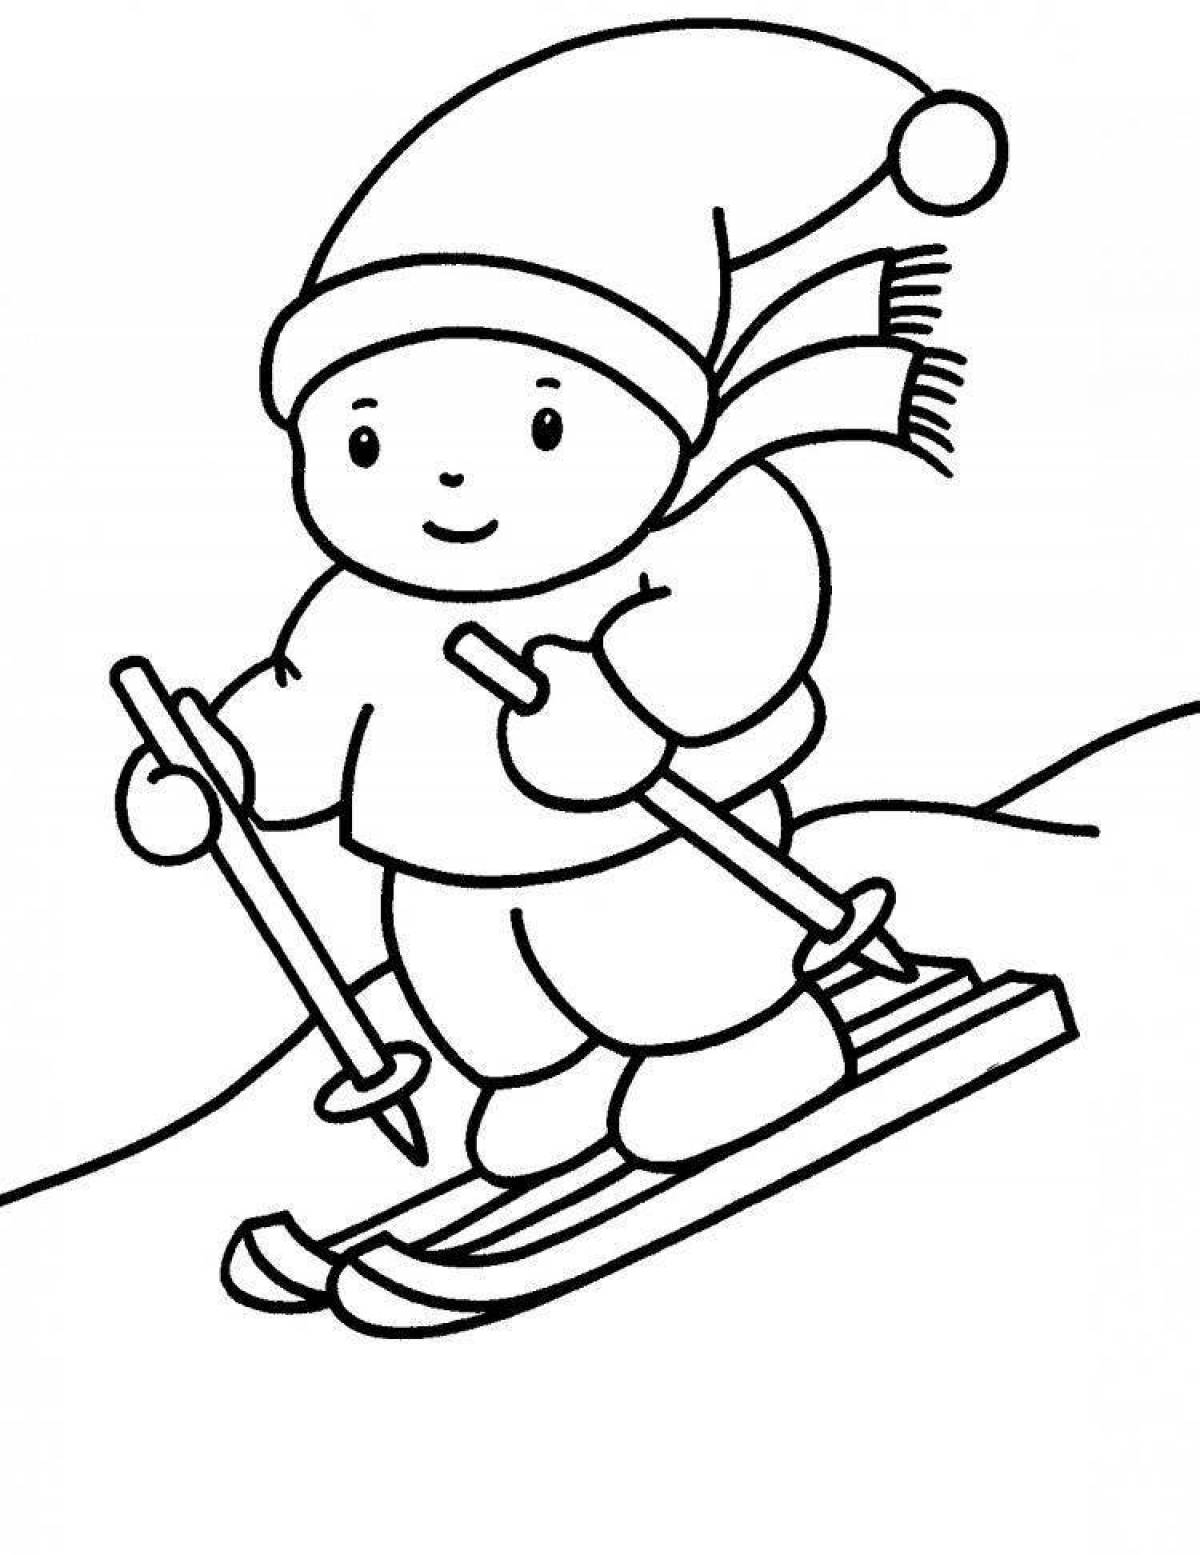 Funny winter sports picture for kindergarten kids